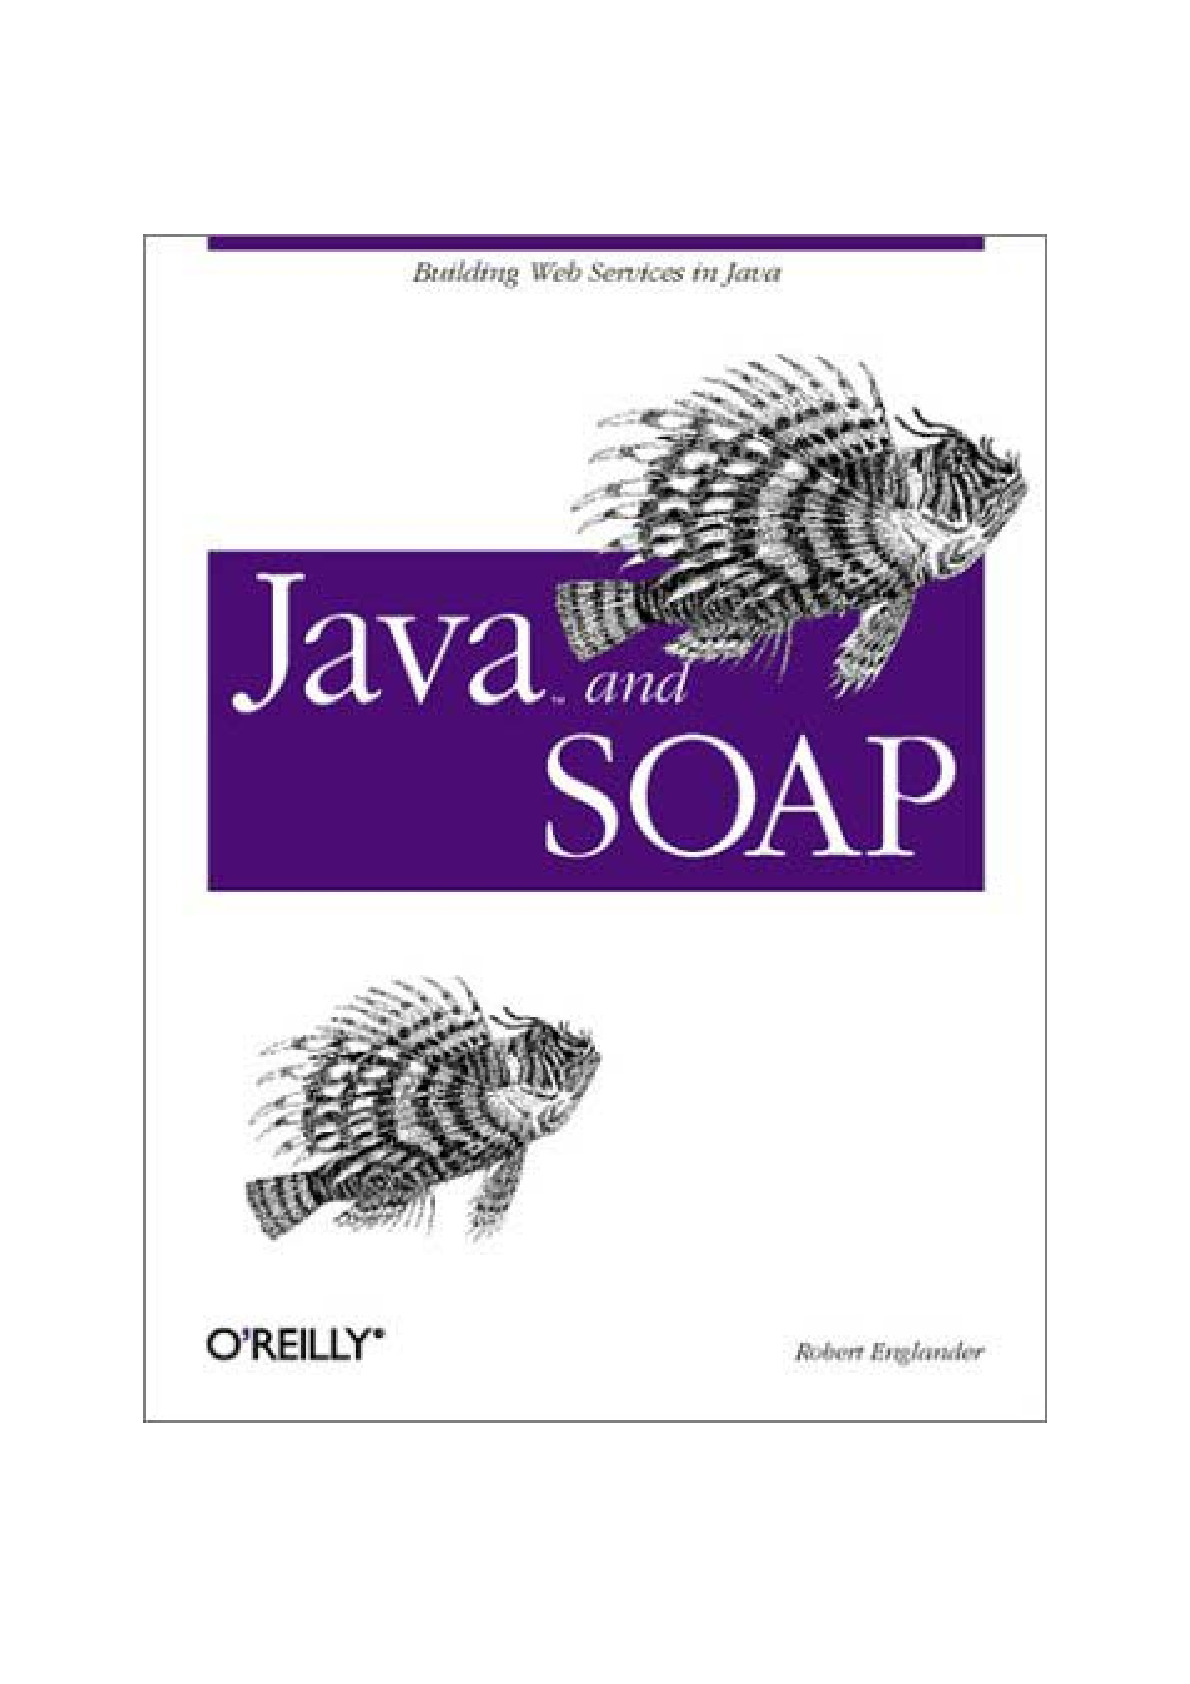 [JAVA][Java And Soap]